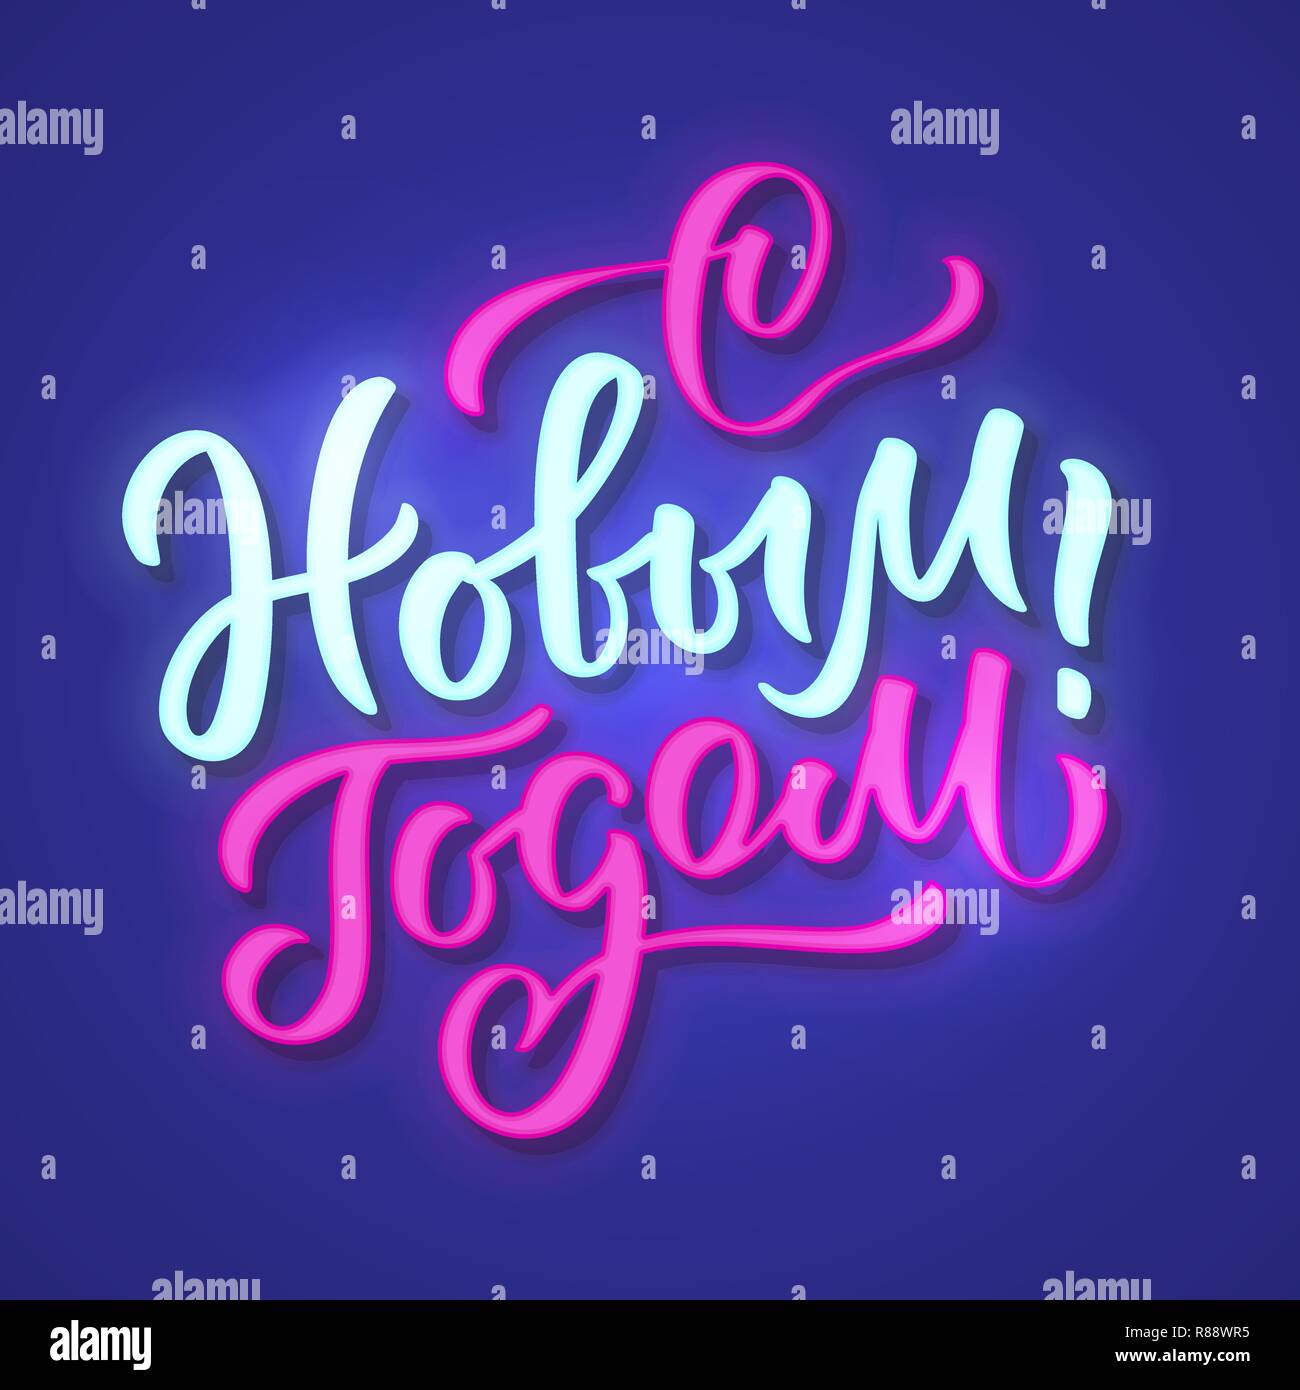 With new year - from Russian, neon text sign. Vector background. Neon glowing signboard, bright luminous banner with lettering in hand-written style. For foto overlay, decoration. Stock Vector